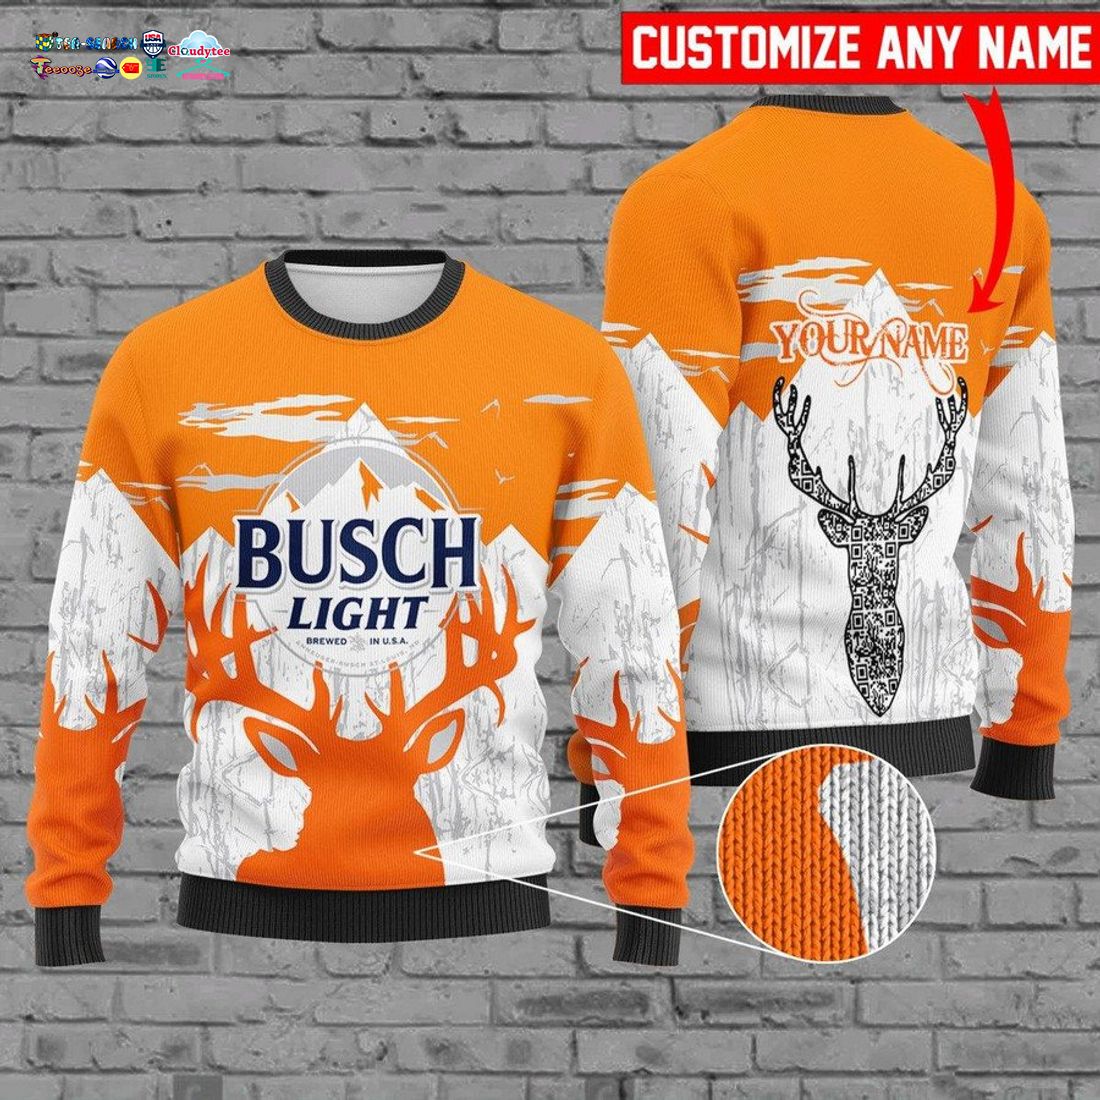 personalized-name-busch-light-ver-1-ugly-christmas-sweater-1-Ecs0j.jpg